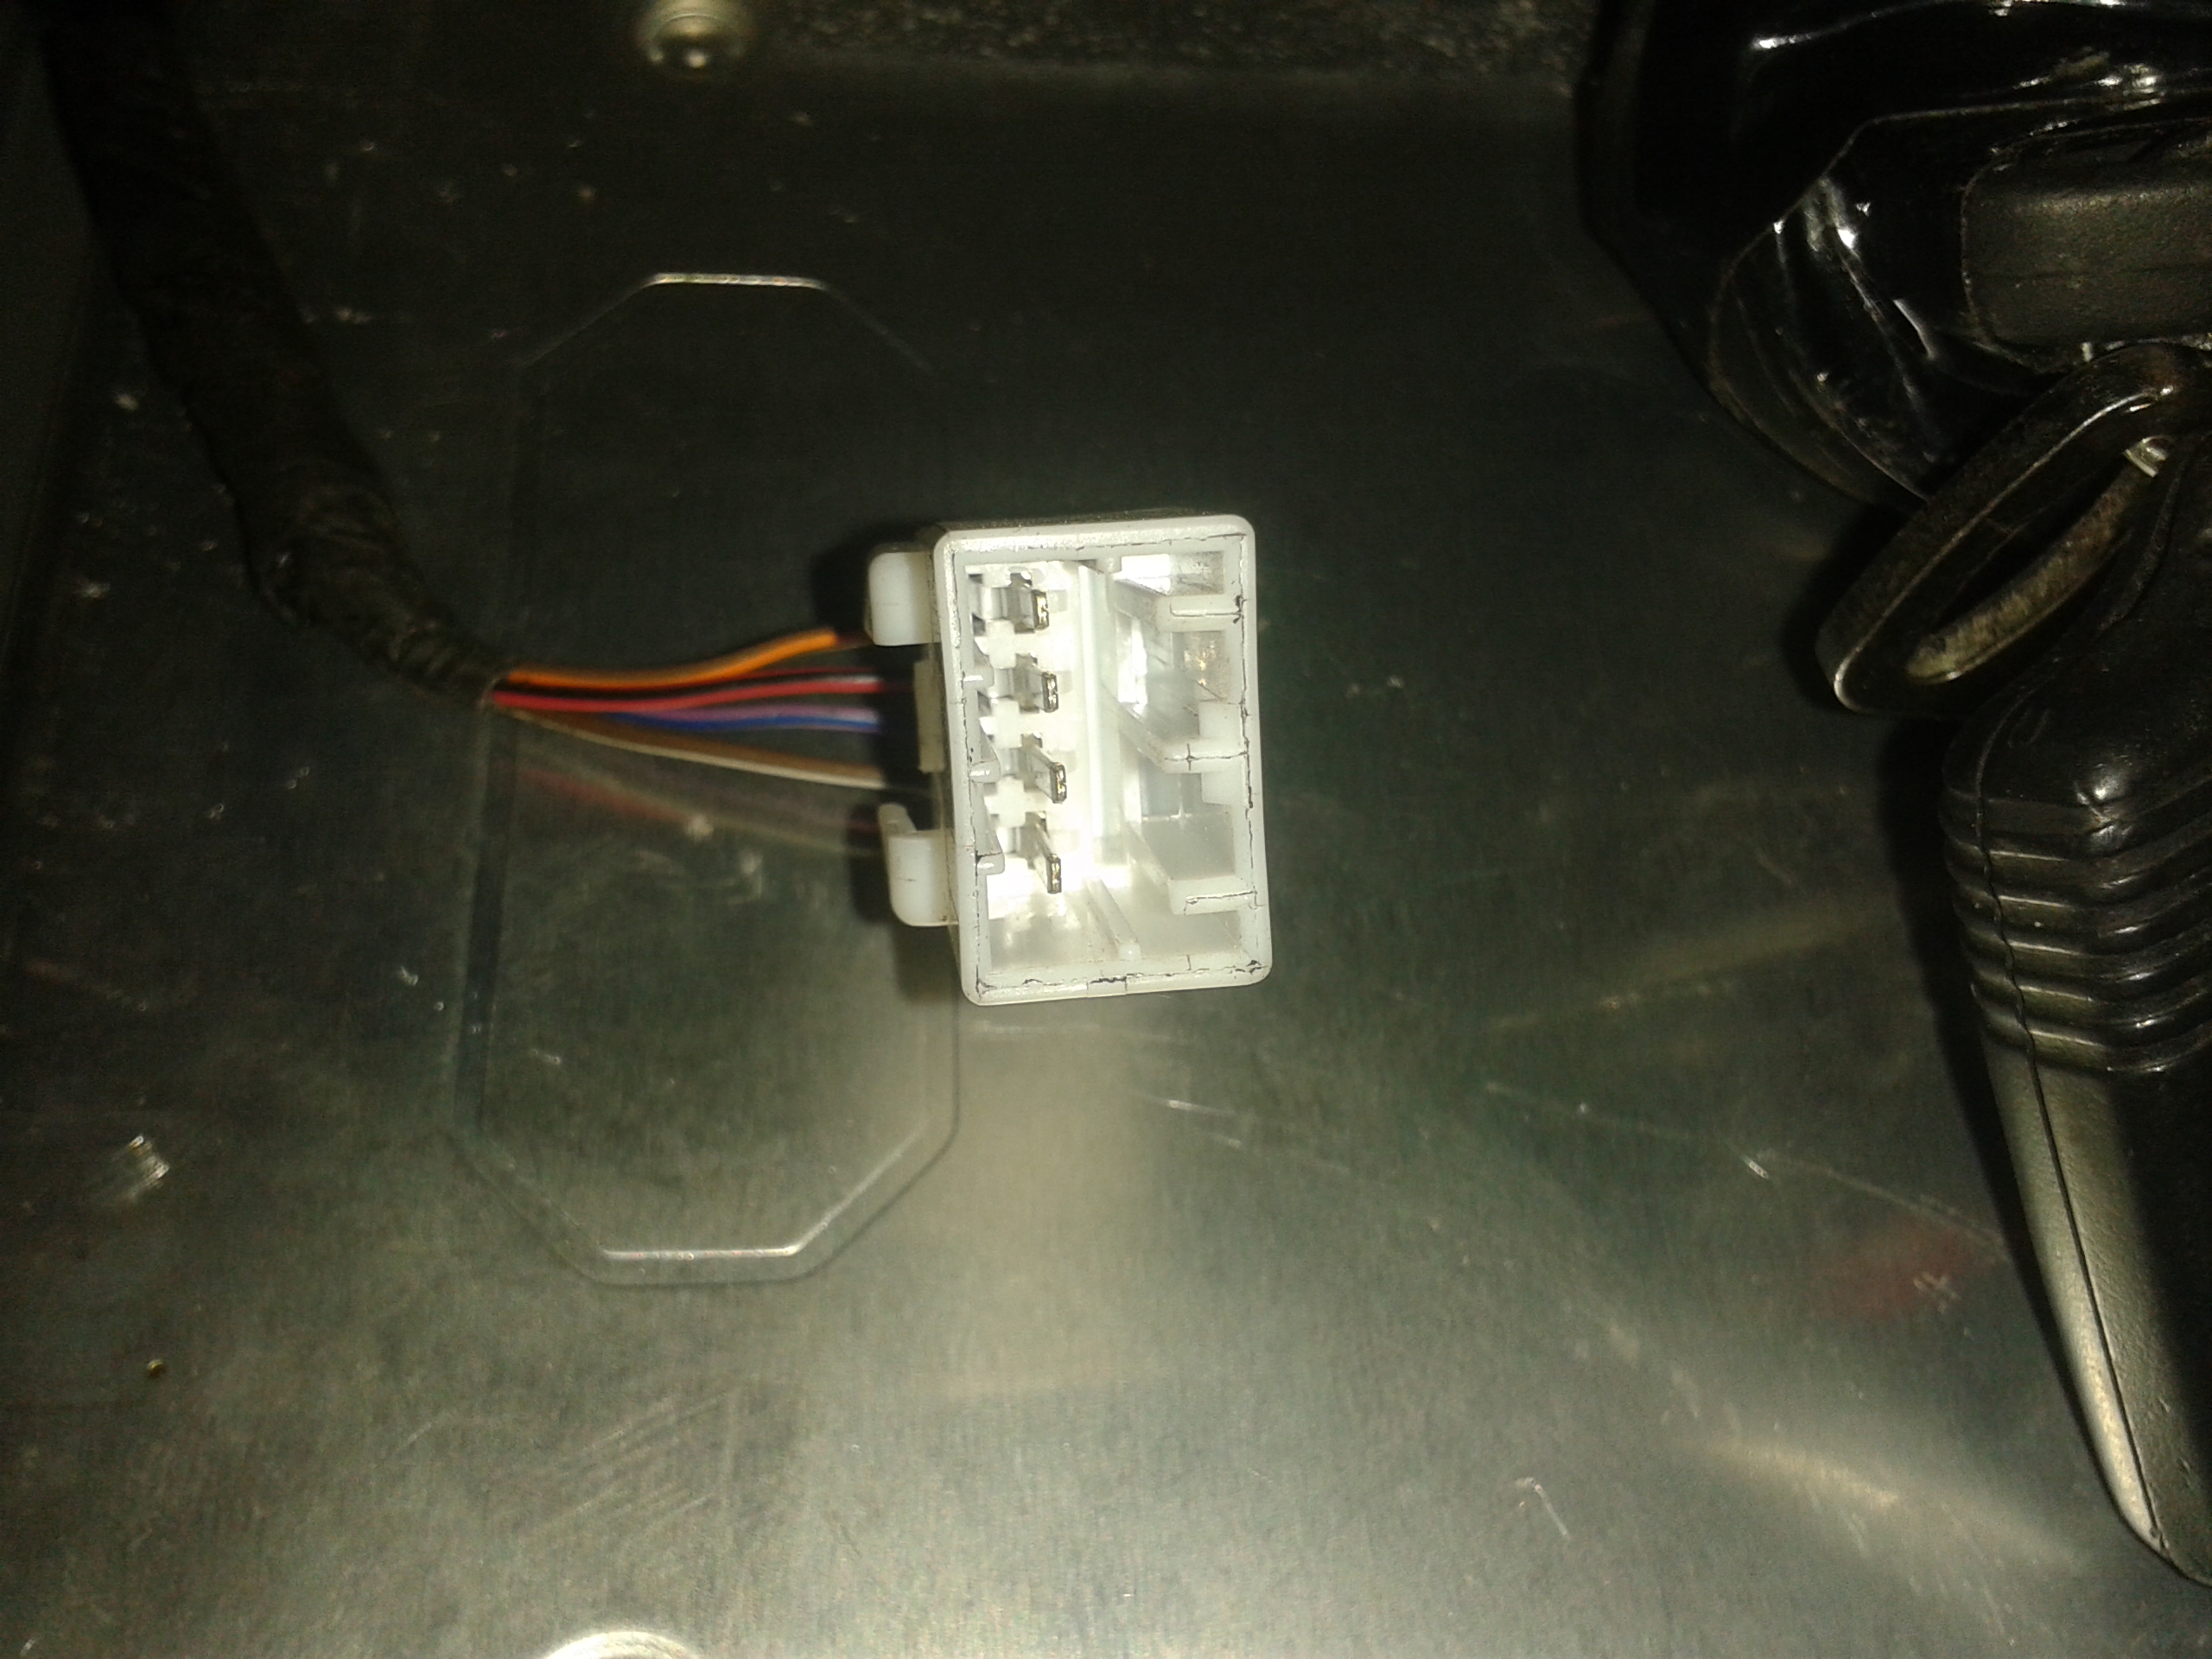 PATS Wiring Schematic - Ford F150 Forum - Community of ... pictures of 08 chevy truck fuse box 